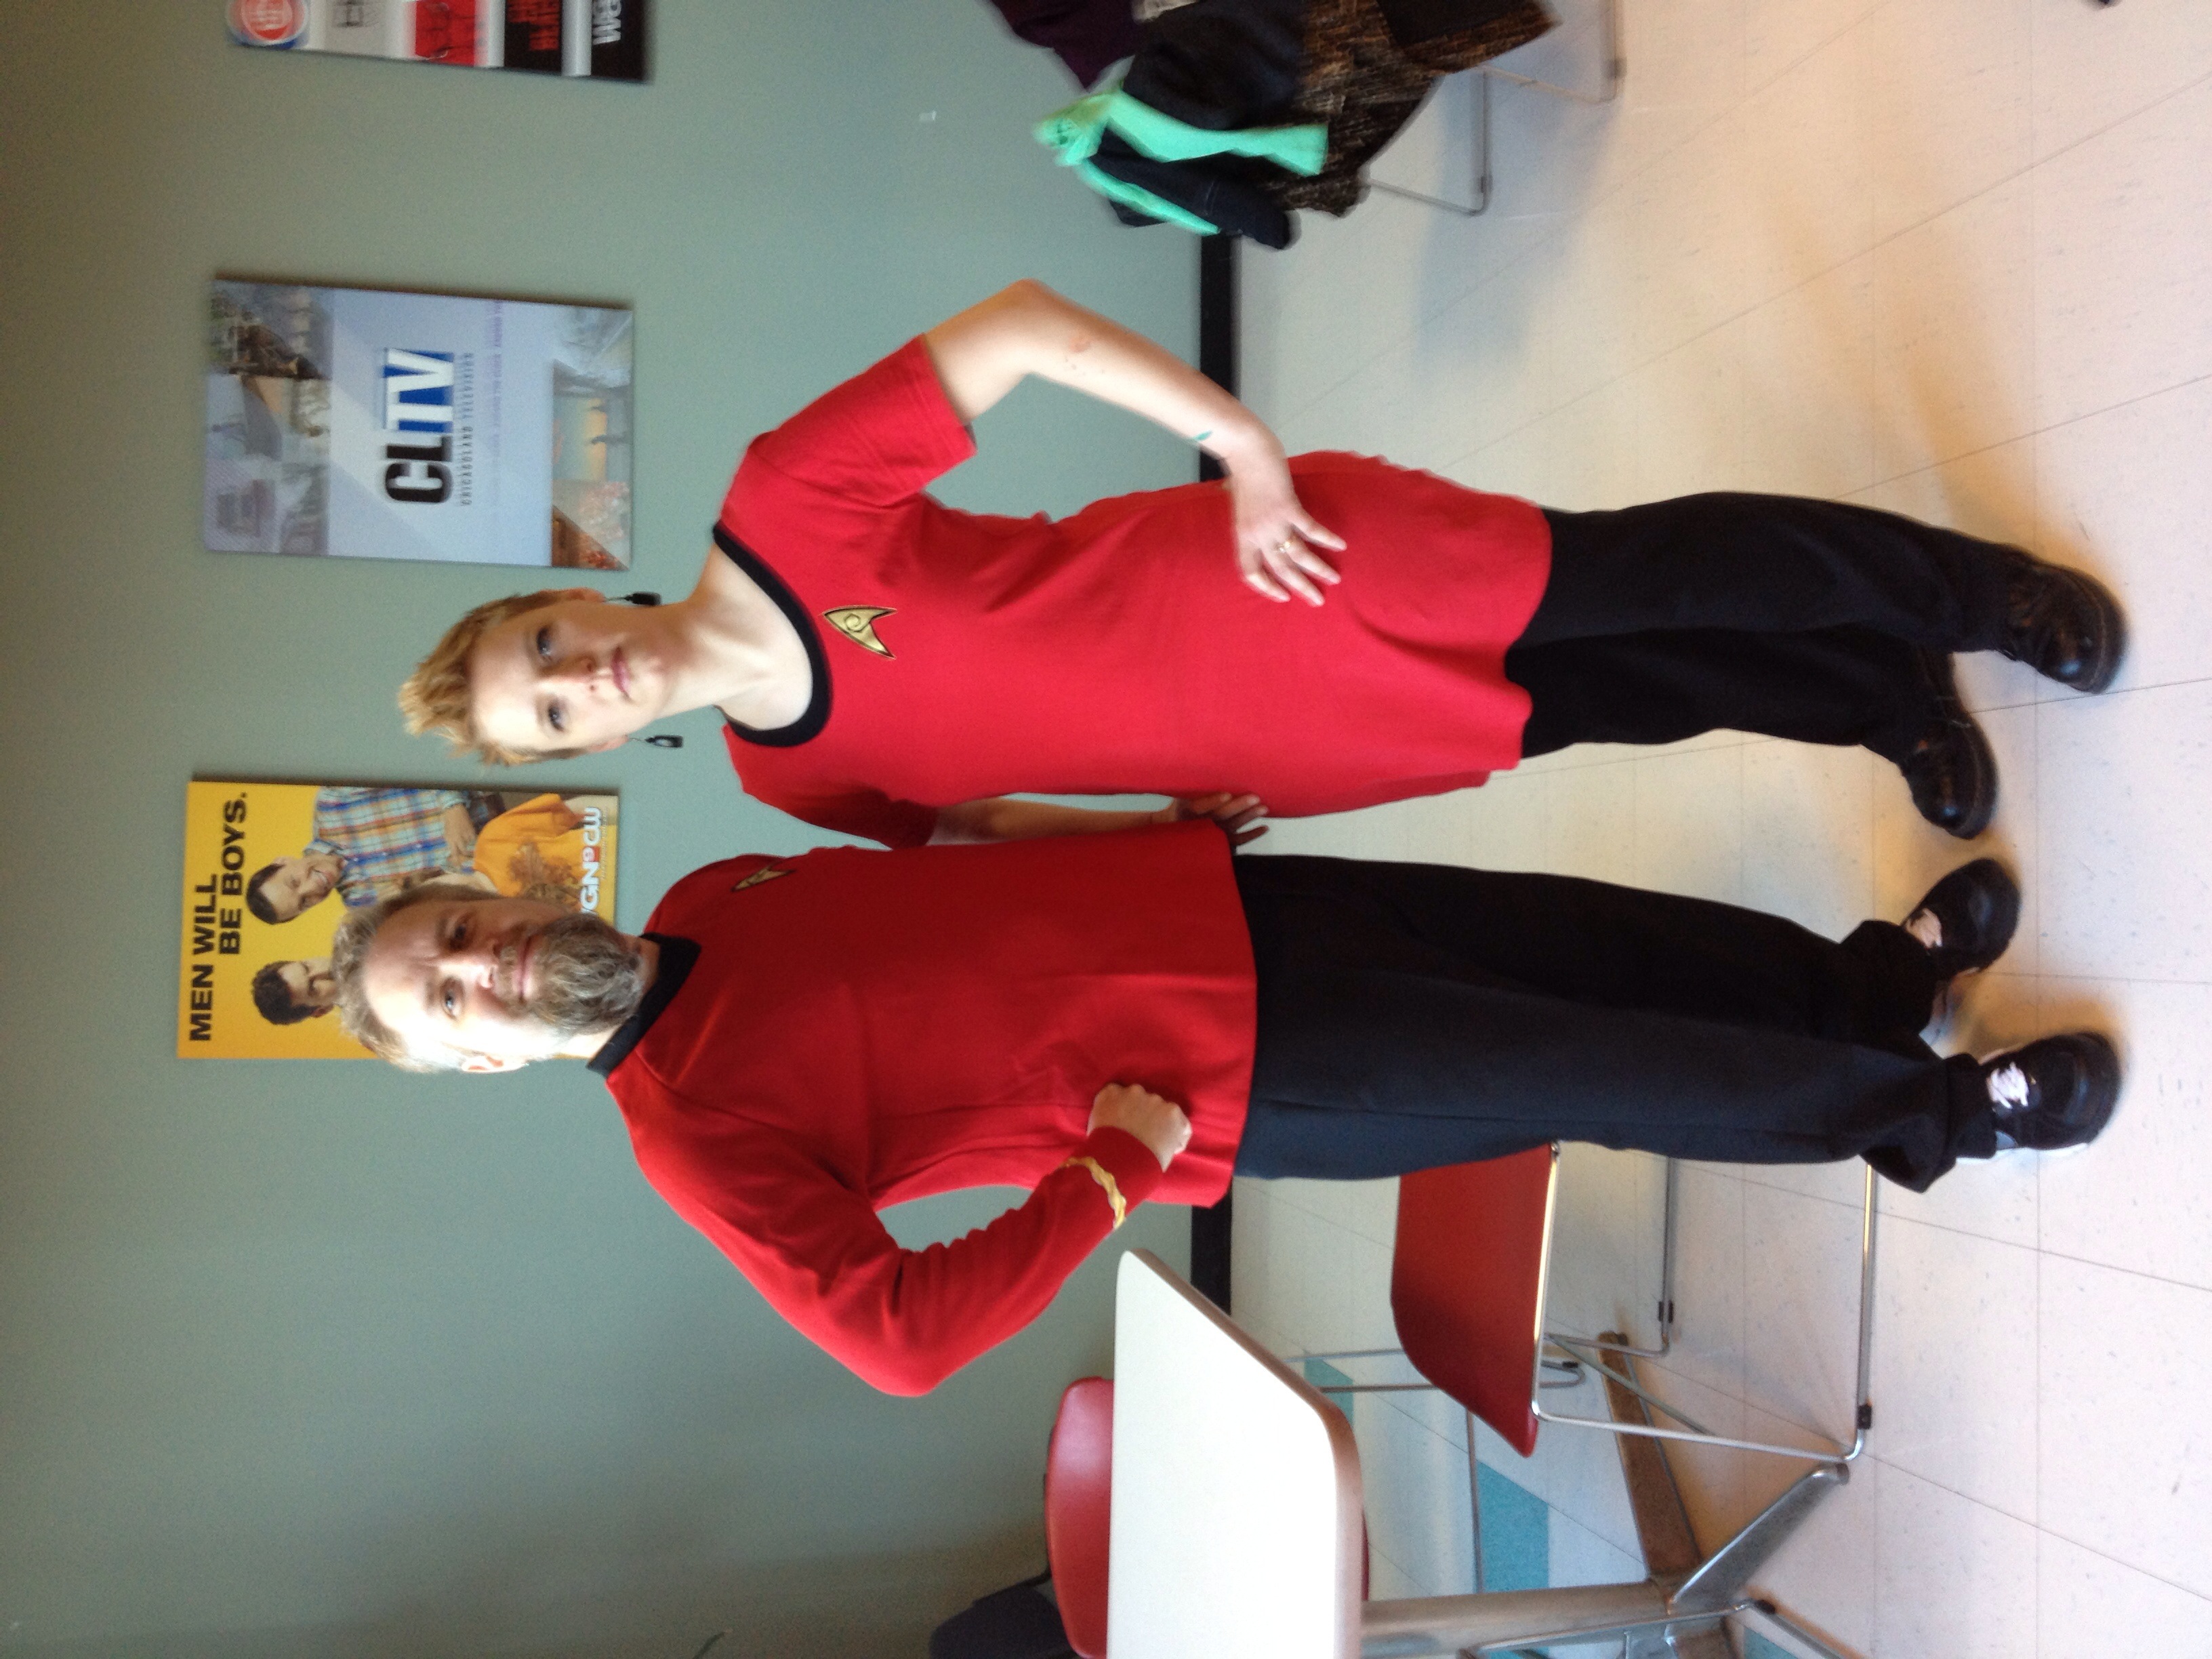 Red Shirts